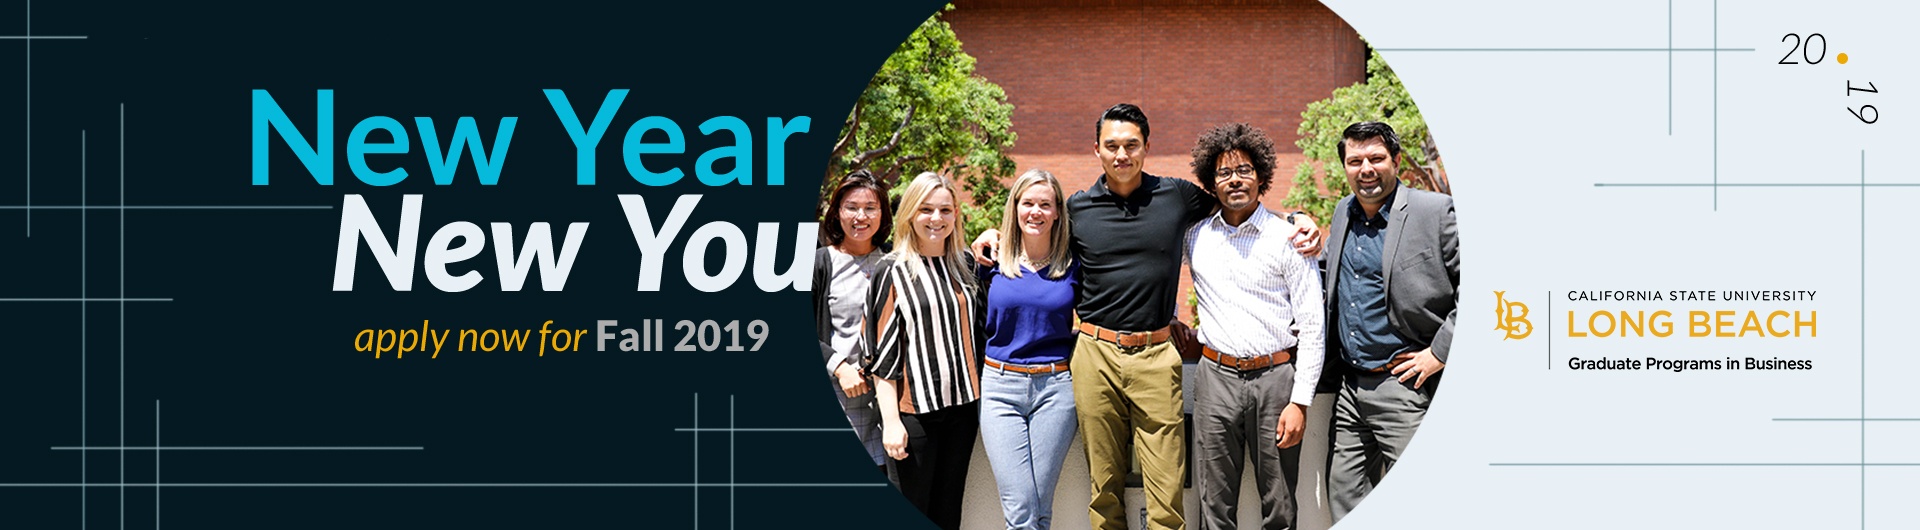 New Year New You apply now for Fall 2019